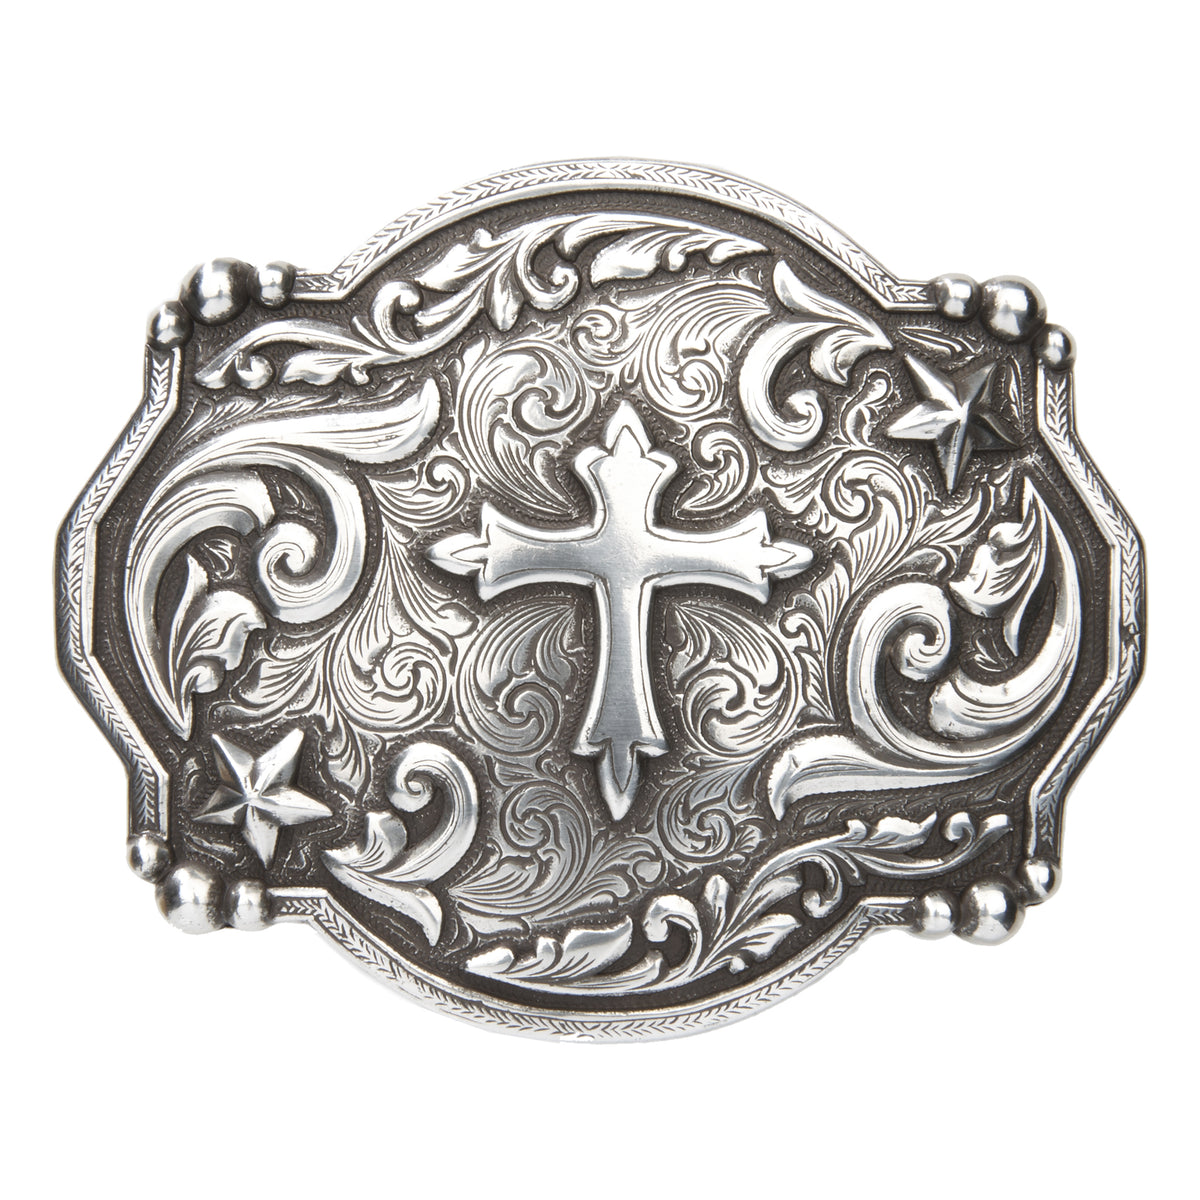 Scalloped Varied Edge Cross with Scrolls Buckle